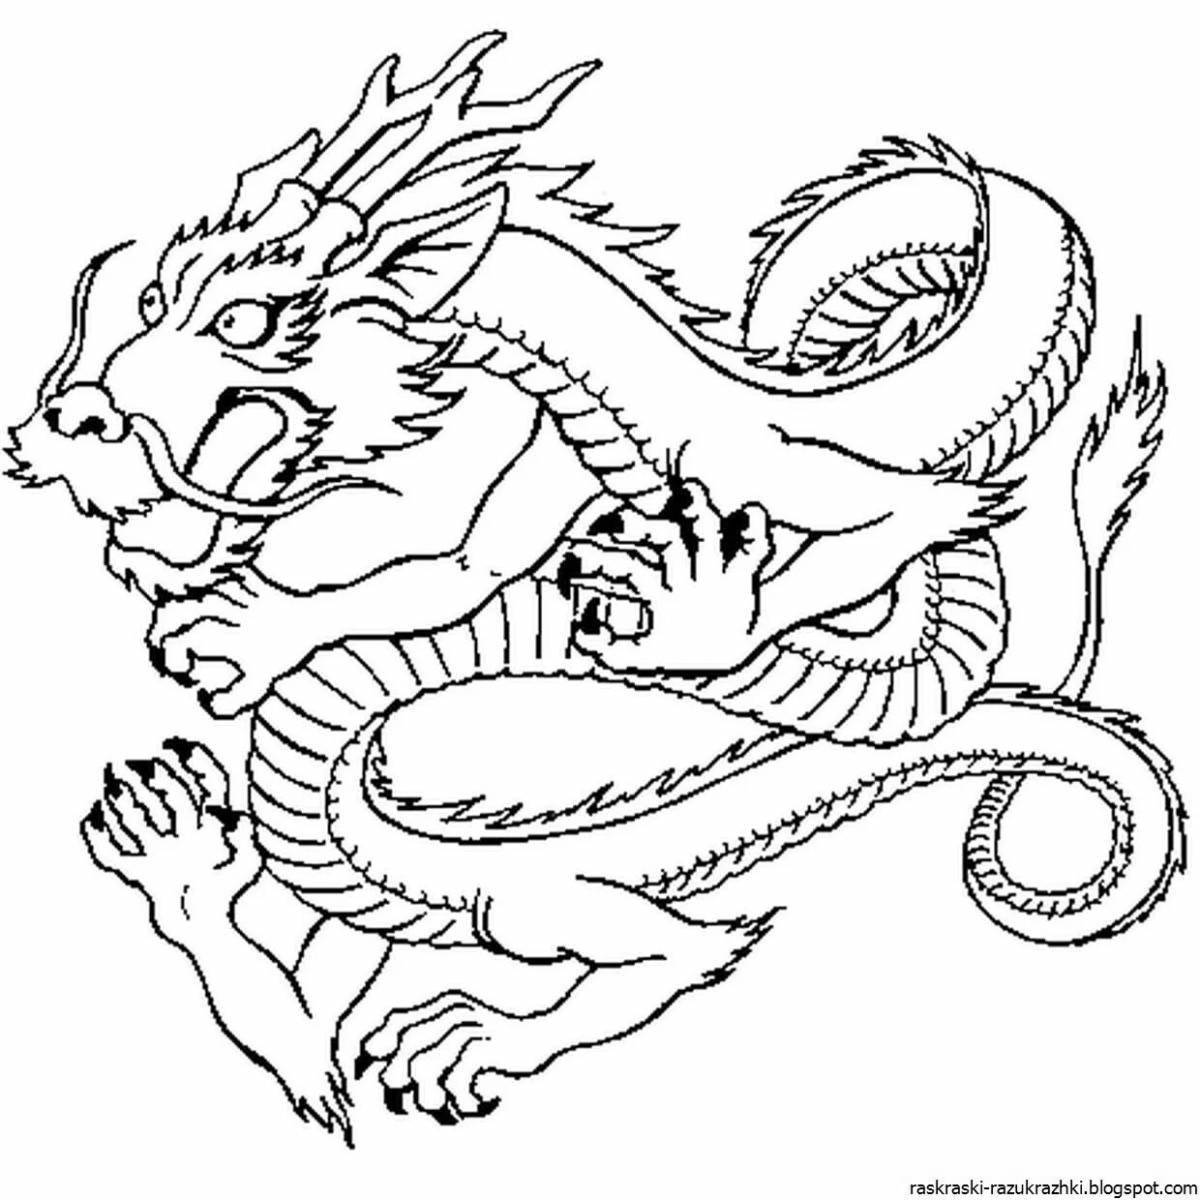 Adorable Chinese dragon coloring book for kids